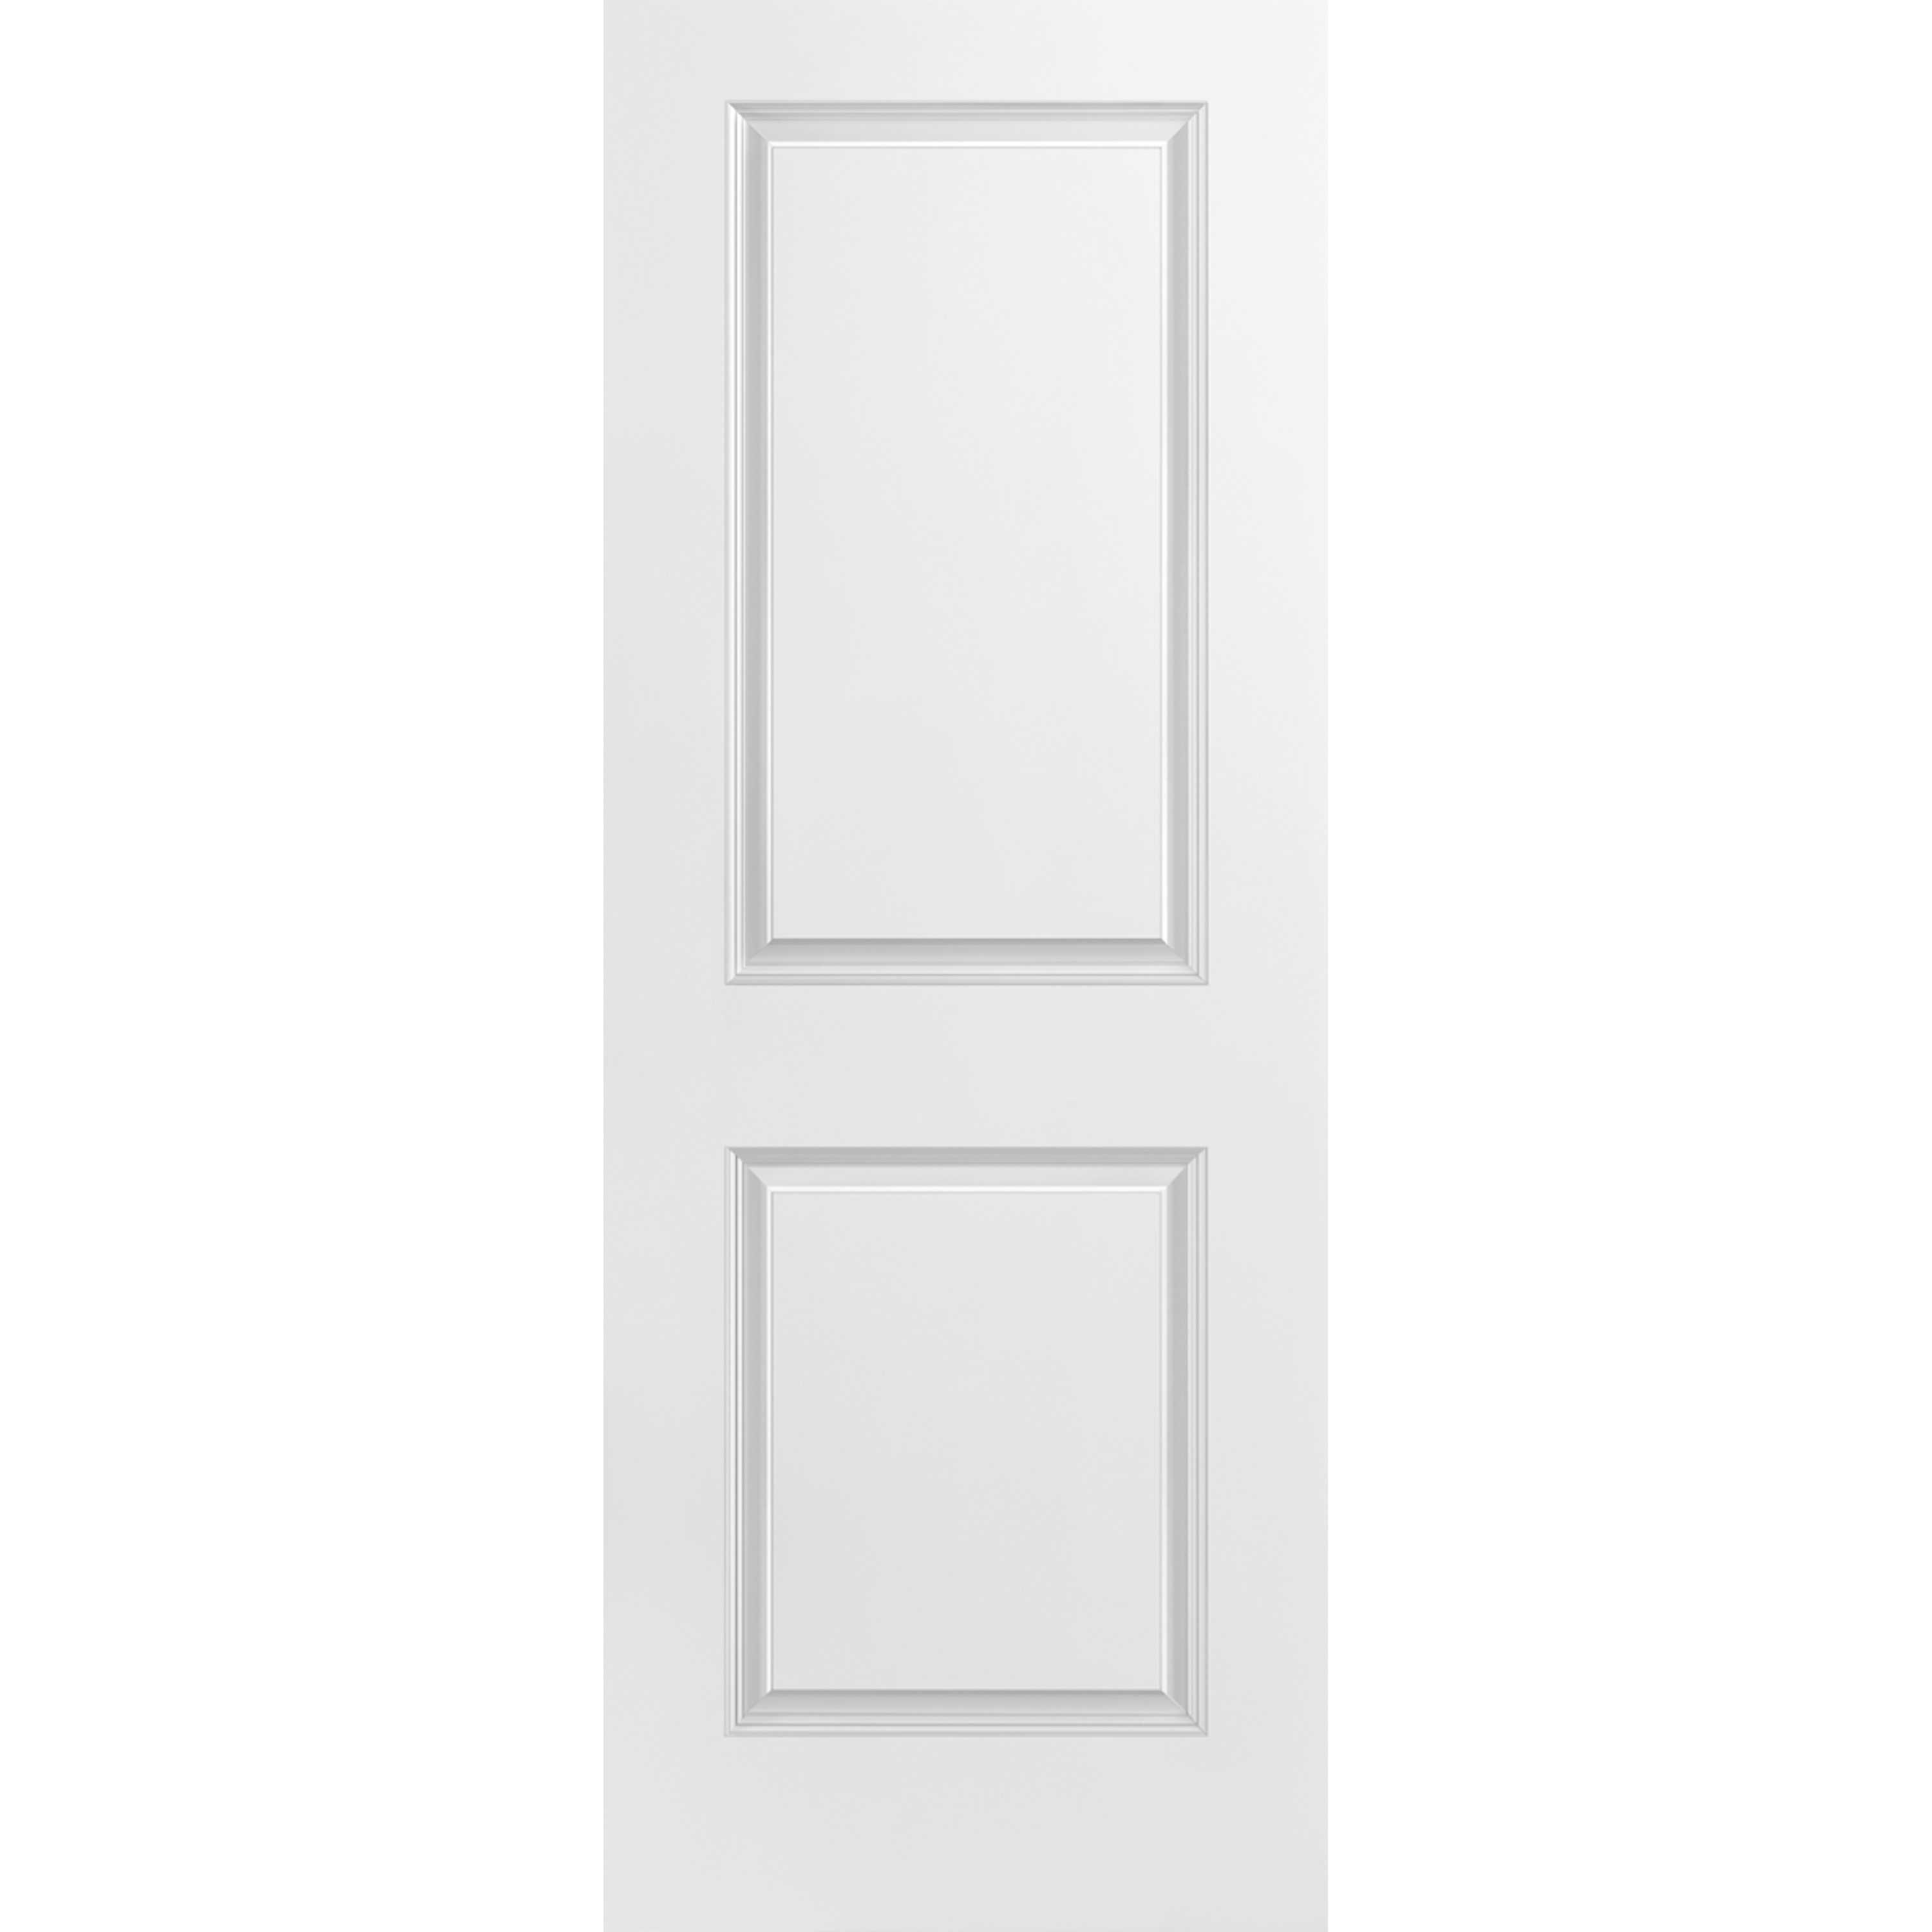 28x80 2 Panel Square Smooth Moulded Fast Fit Door with 4-5/8" Primed Finger Joint Jamb